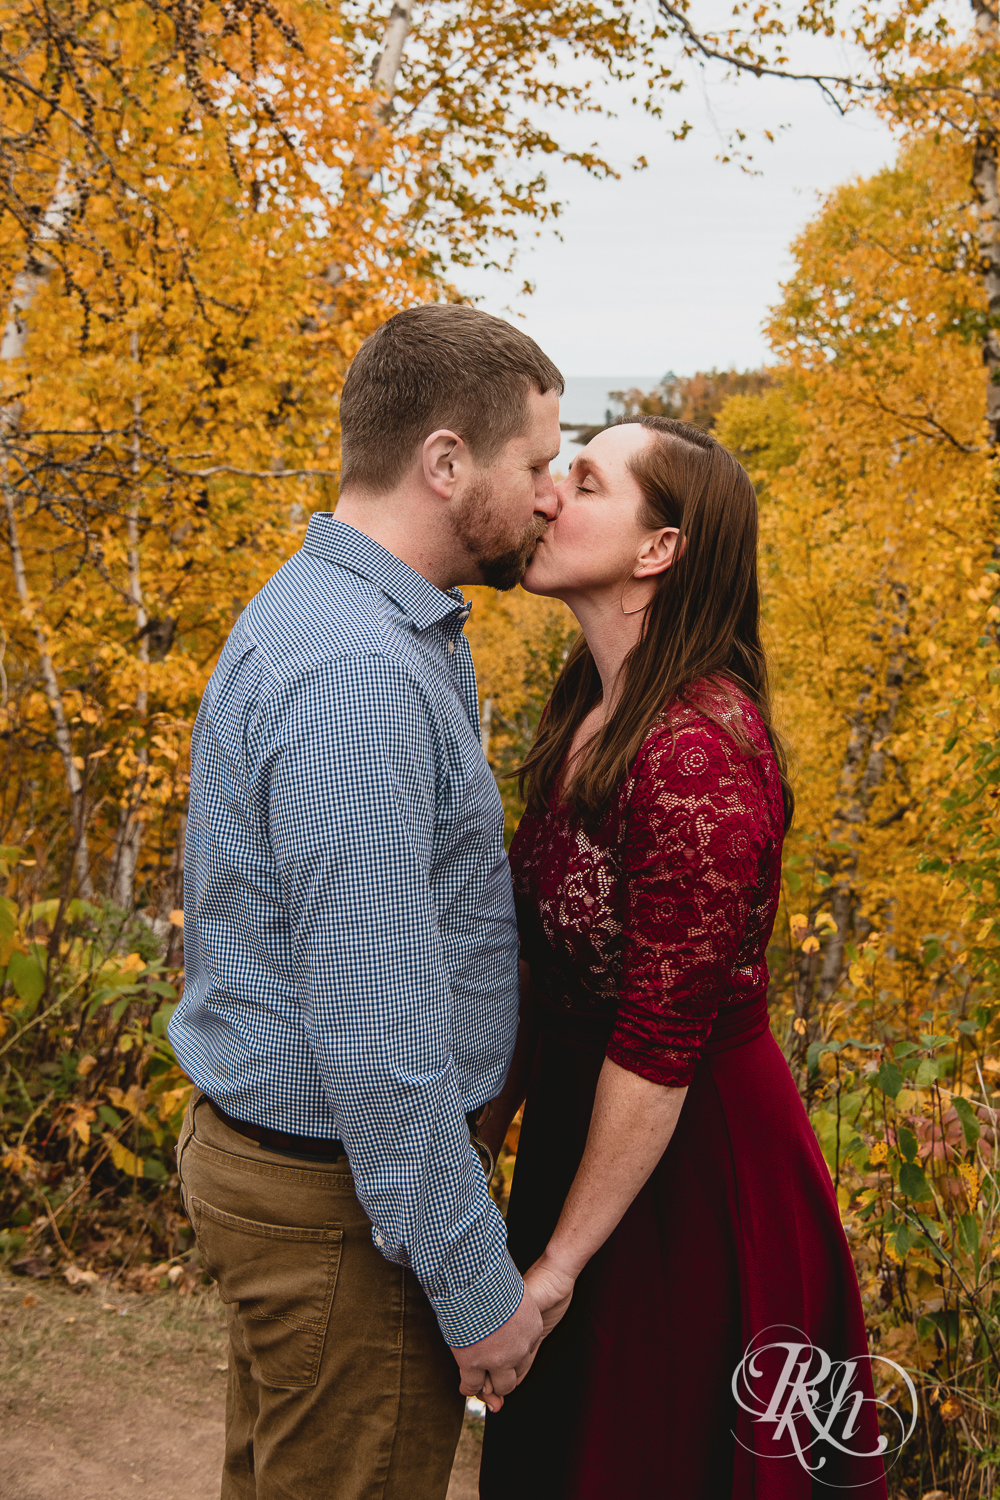 Man and woman in red dress kiss in front of fall colors in Gooseberry Falls in Two Harbors, Minnesota.